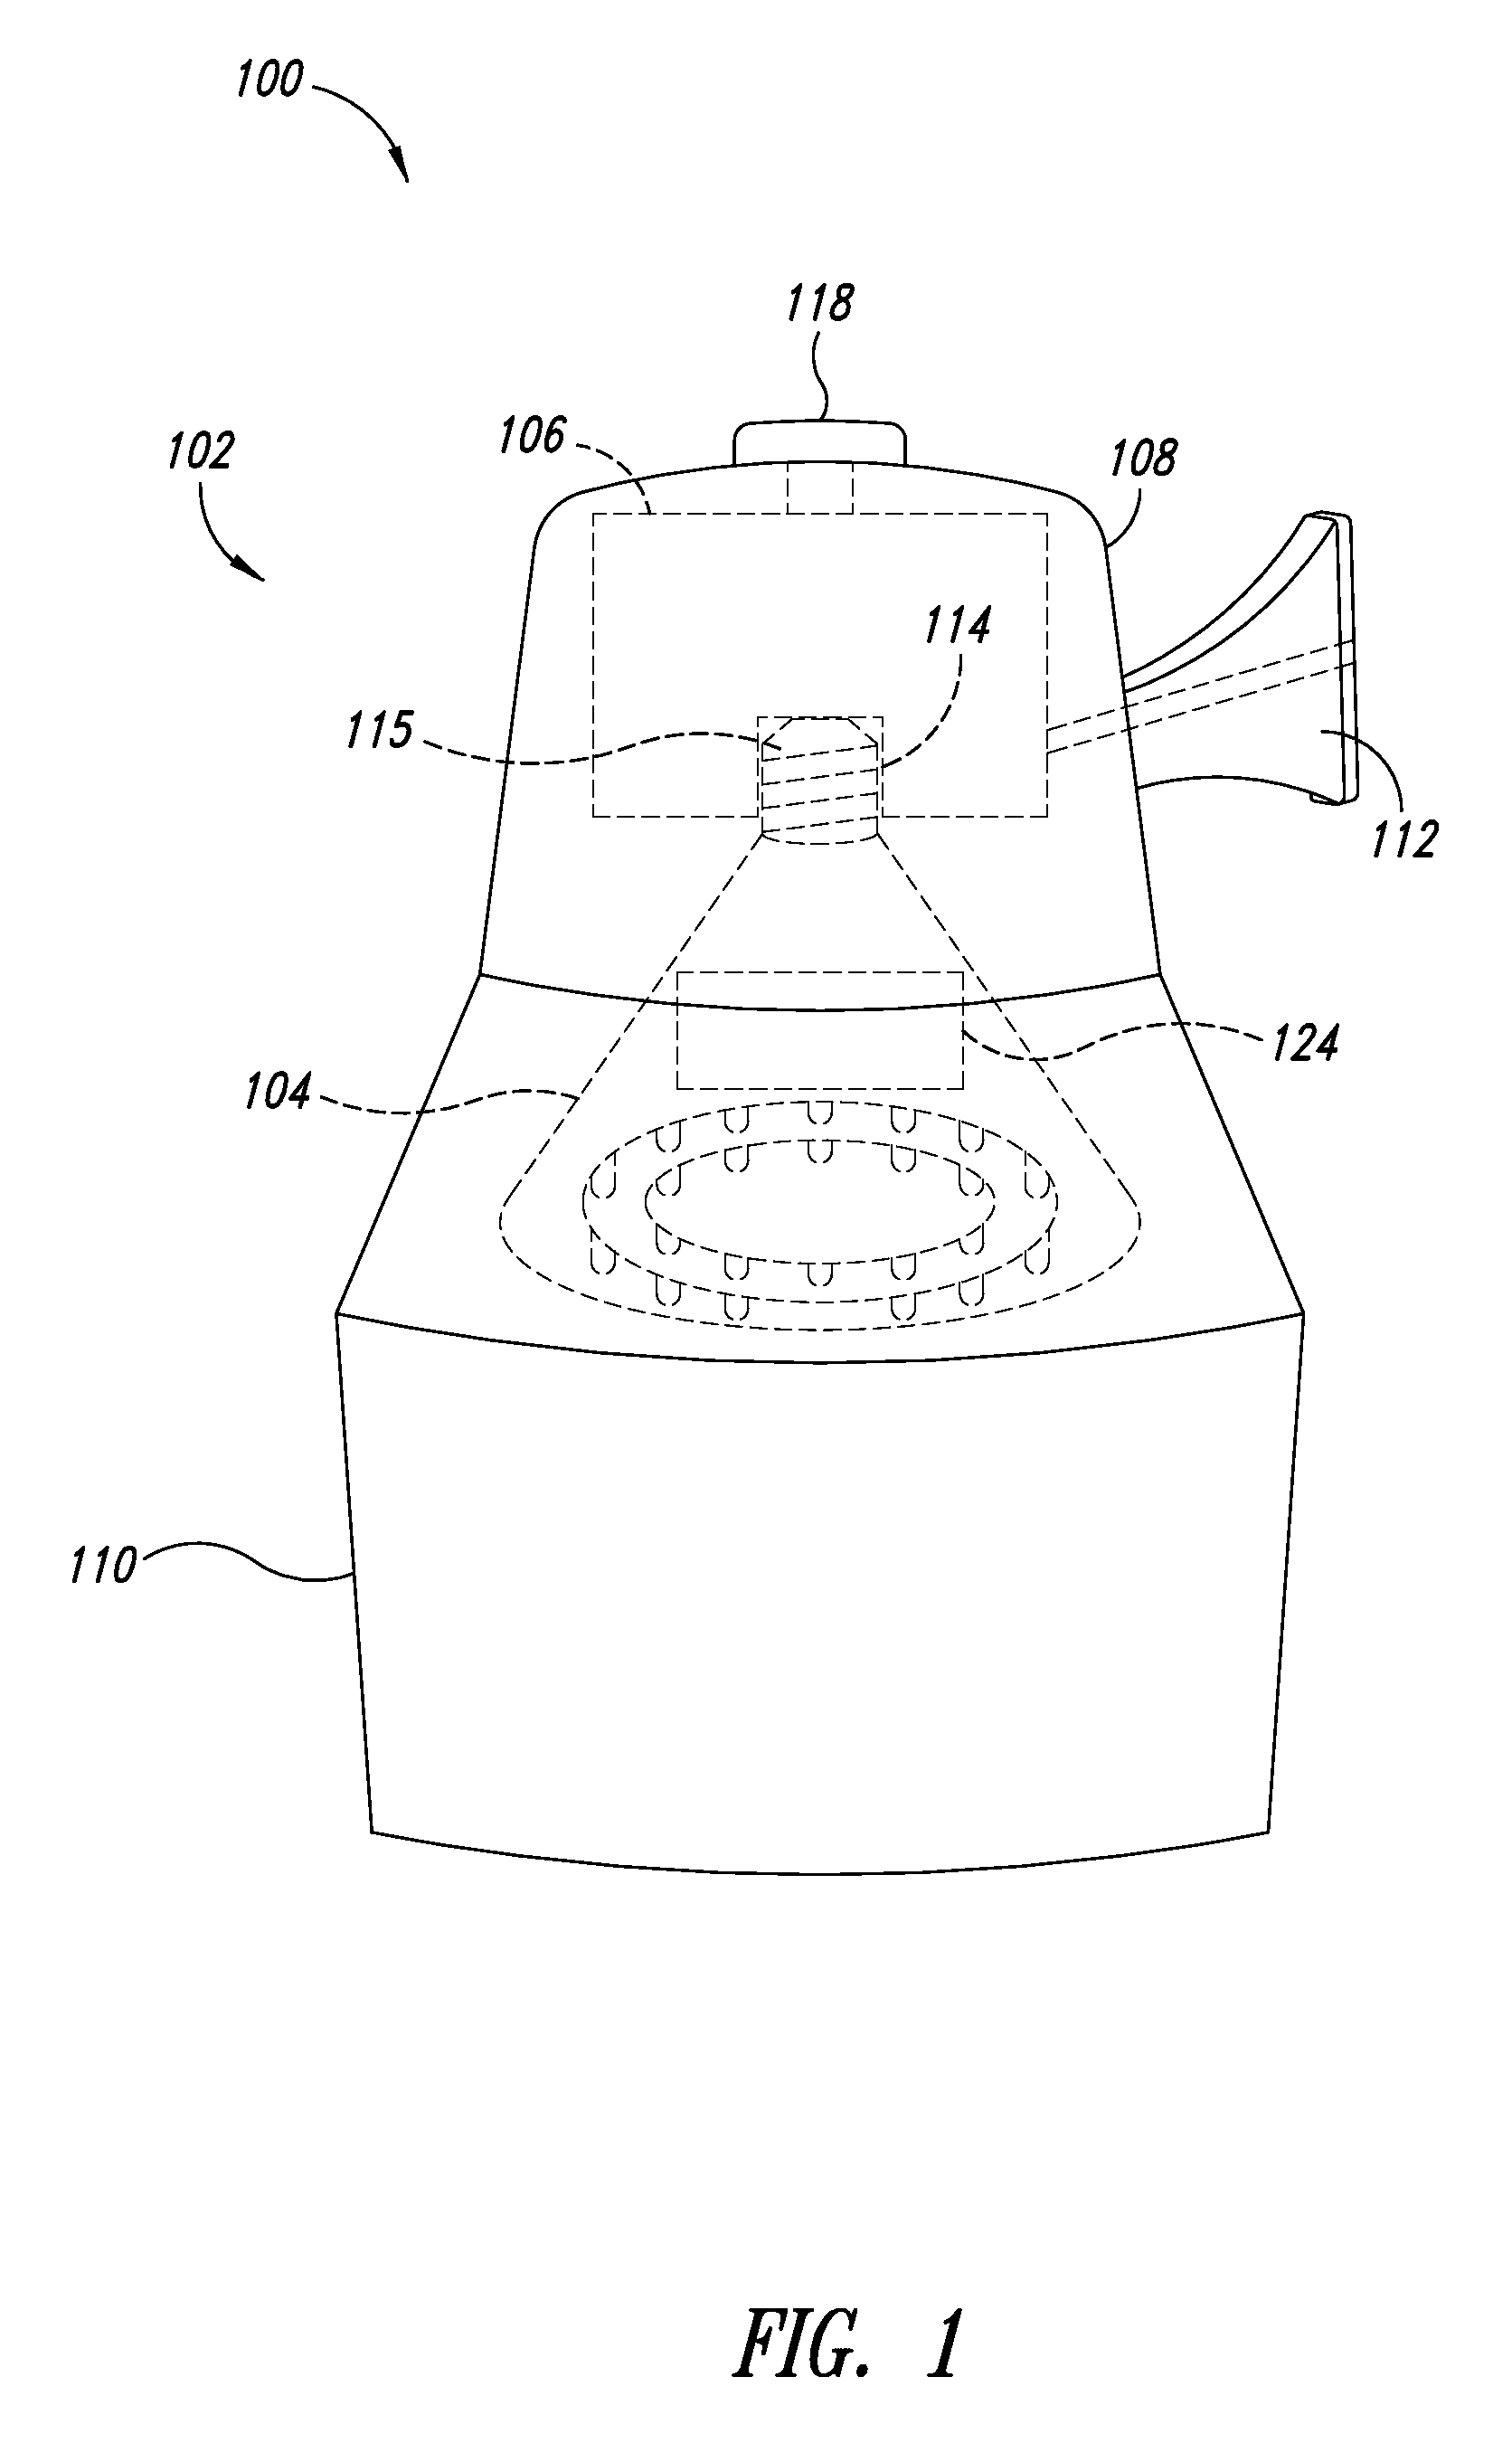 Apparatus and method of operating a luminaire